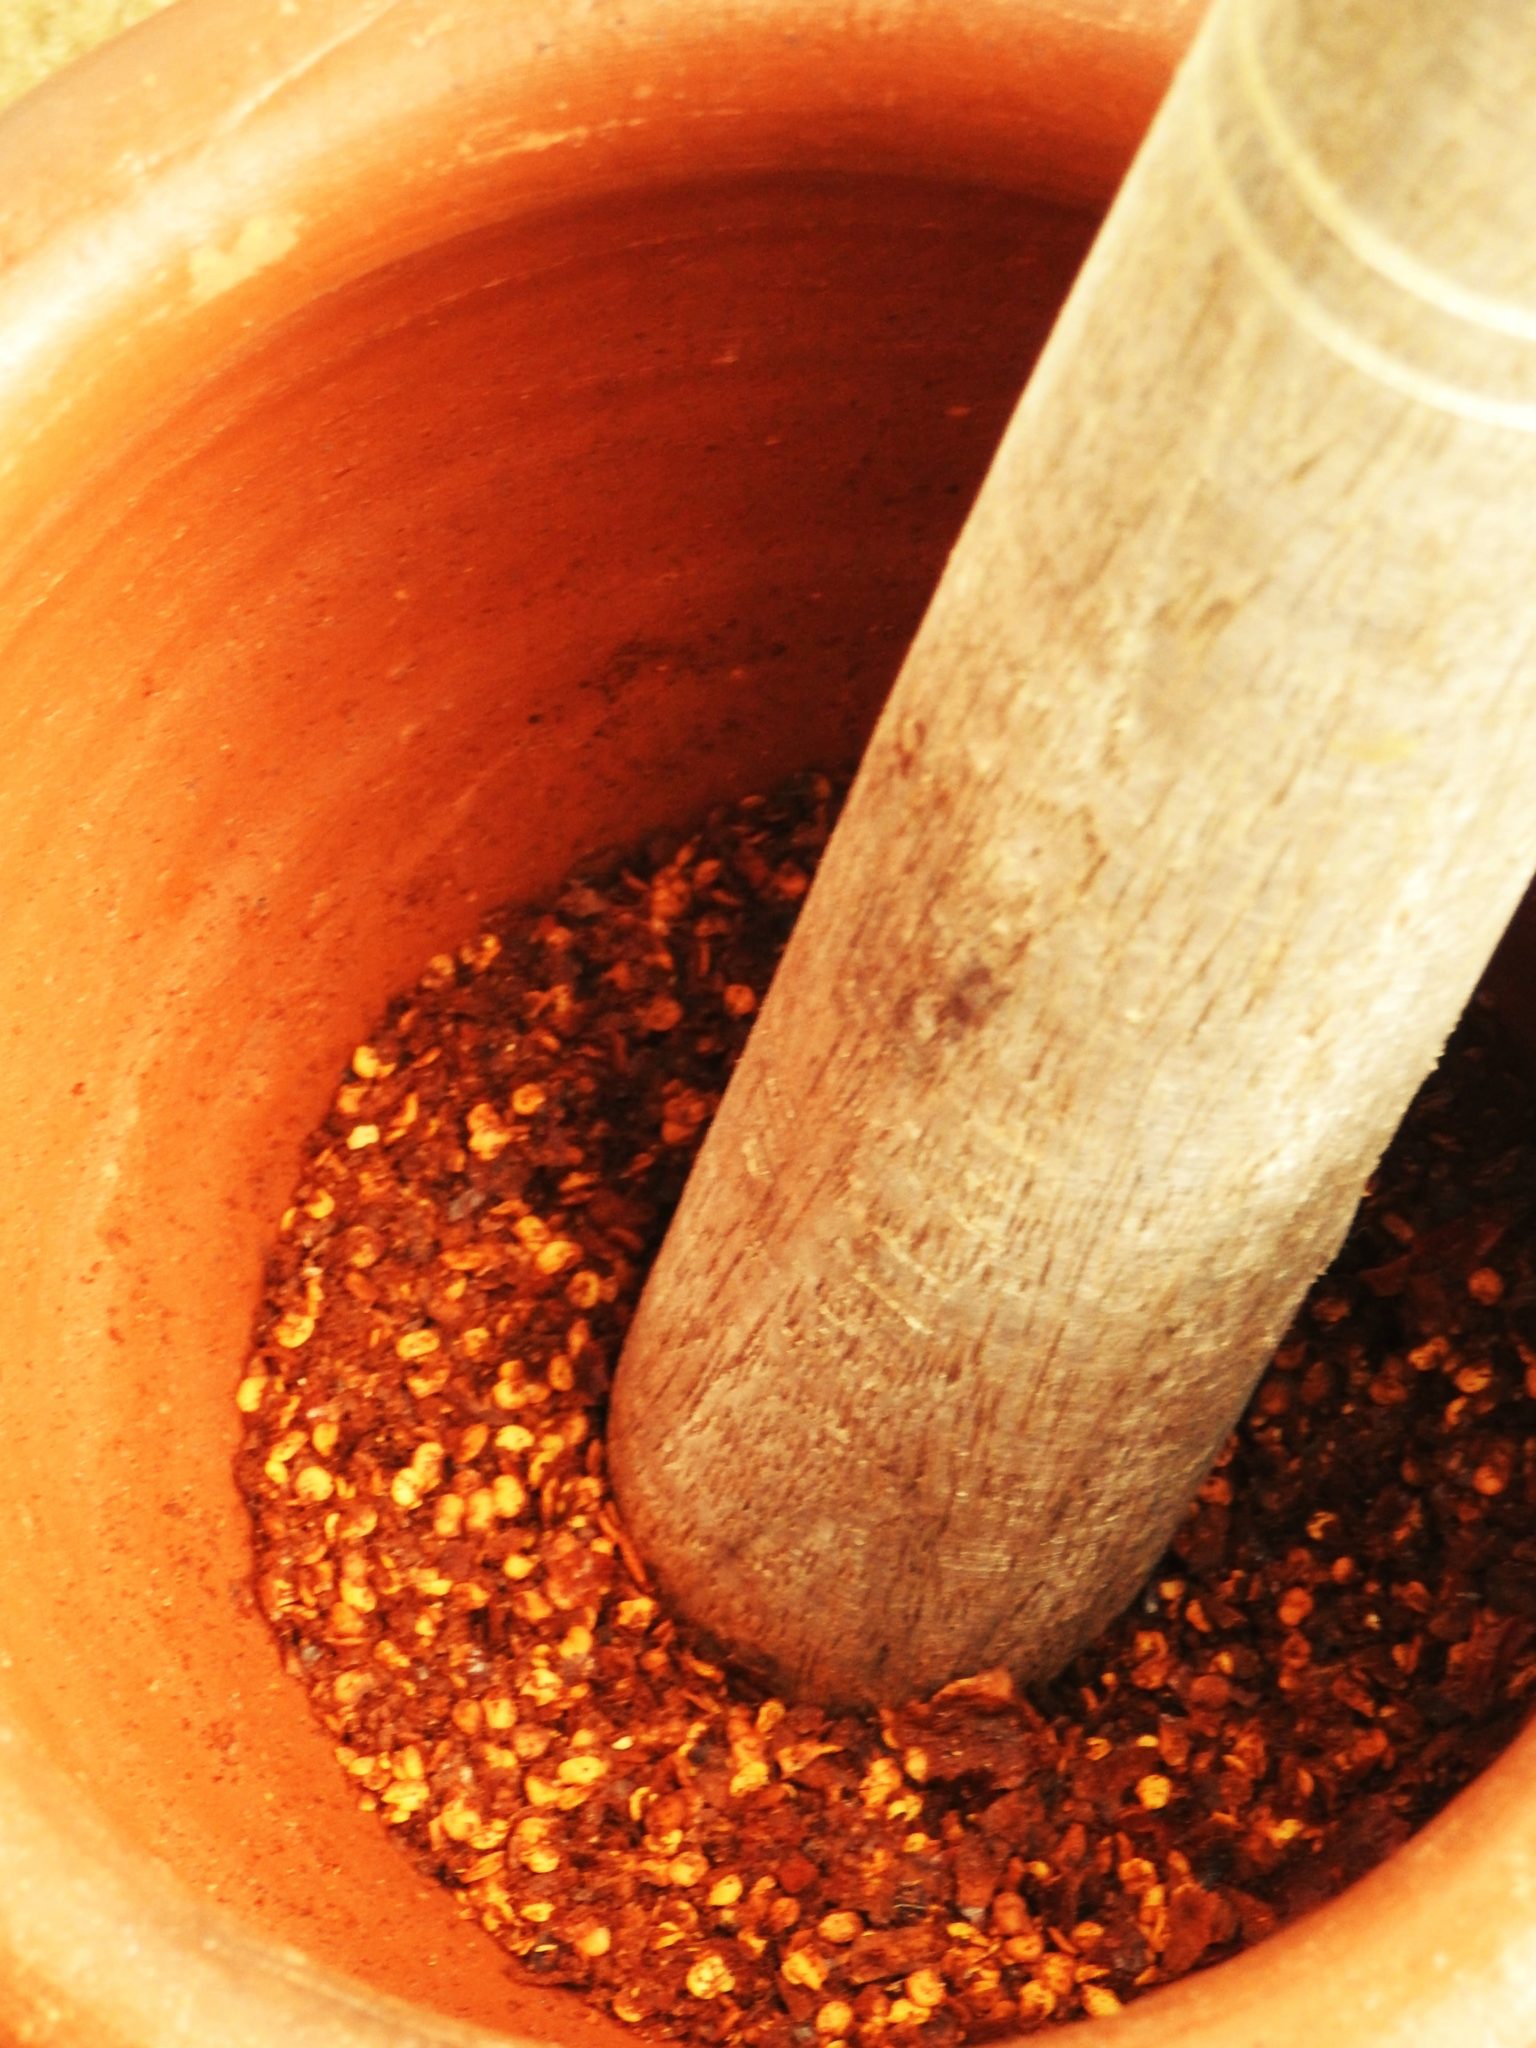 Pounding Toasted Dried Bird's Eye Chili In A Mortar